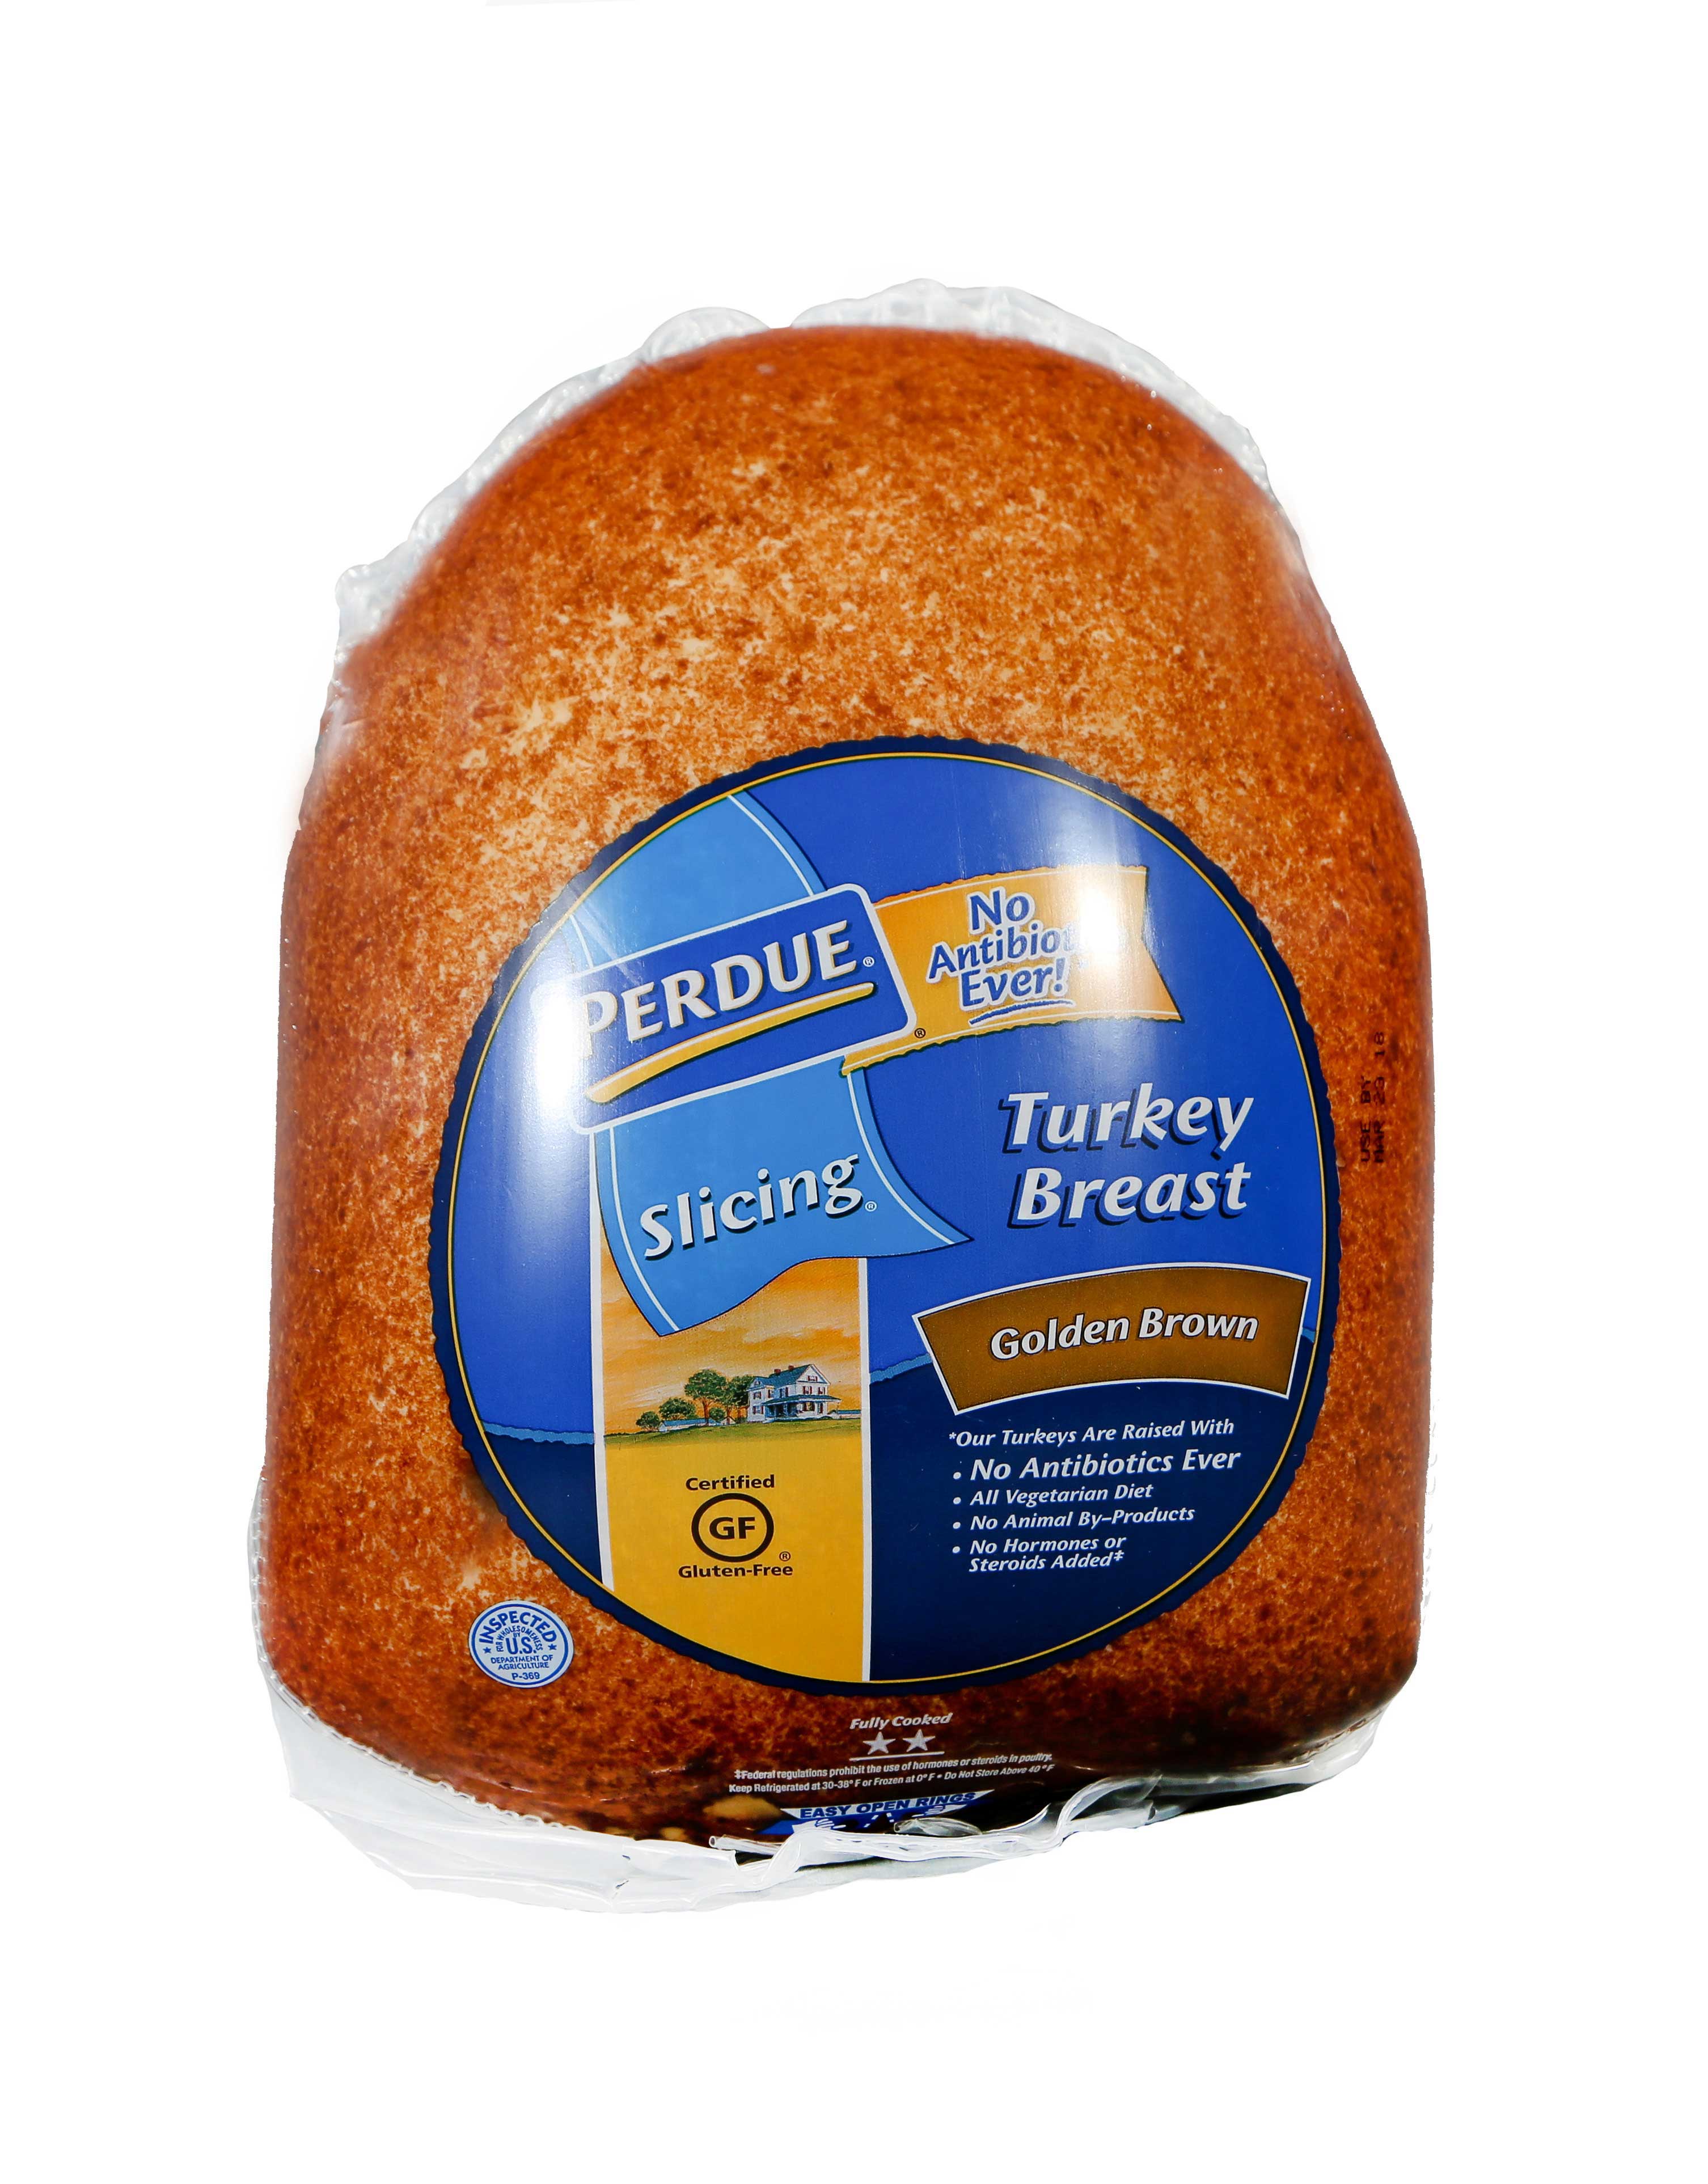 Perdue Farms Golden Browned Signature Skinless Turkey Breast, 9.5